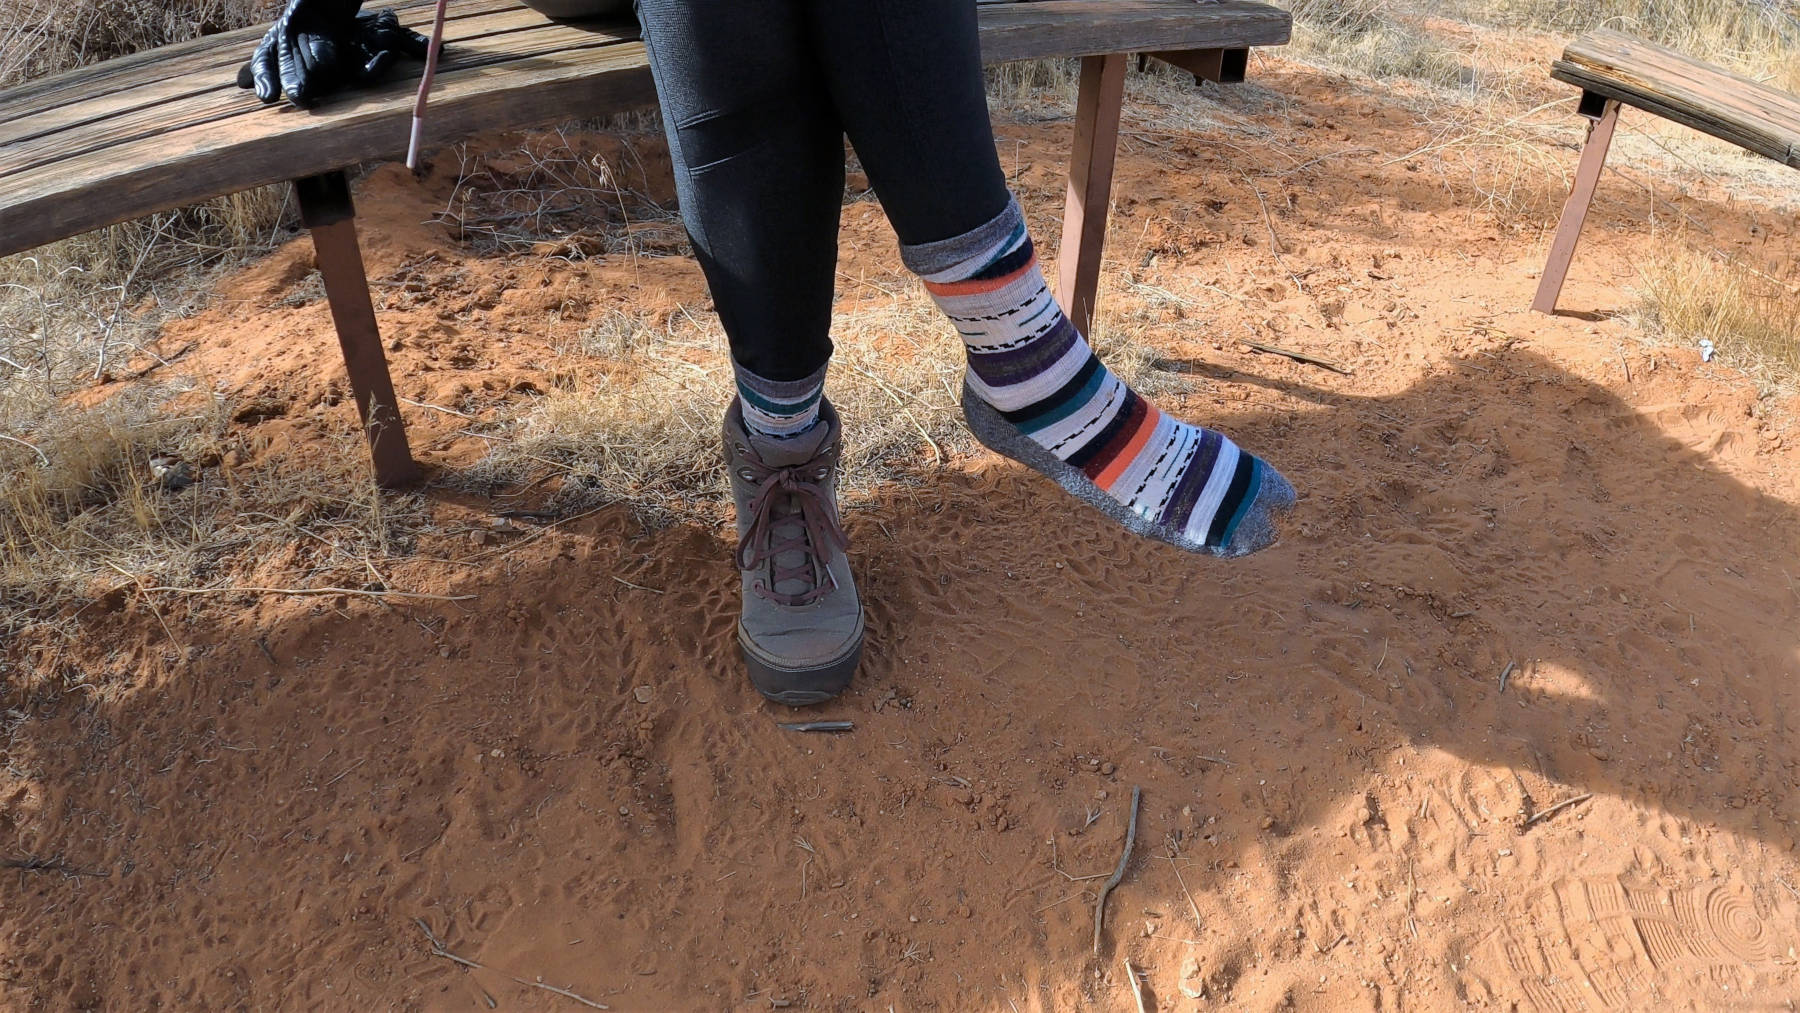 Are hiking socks necessary - I think so, especially after a sandy hike in Utah